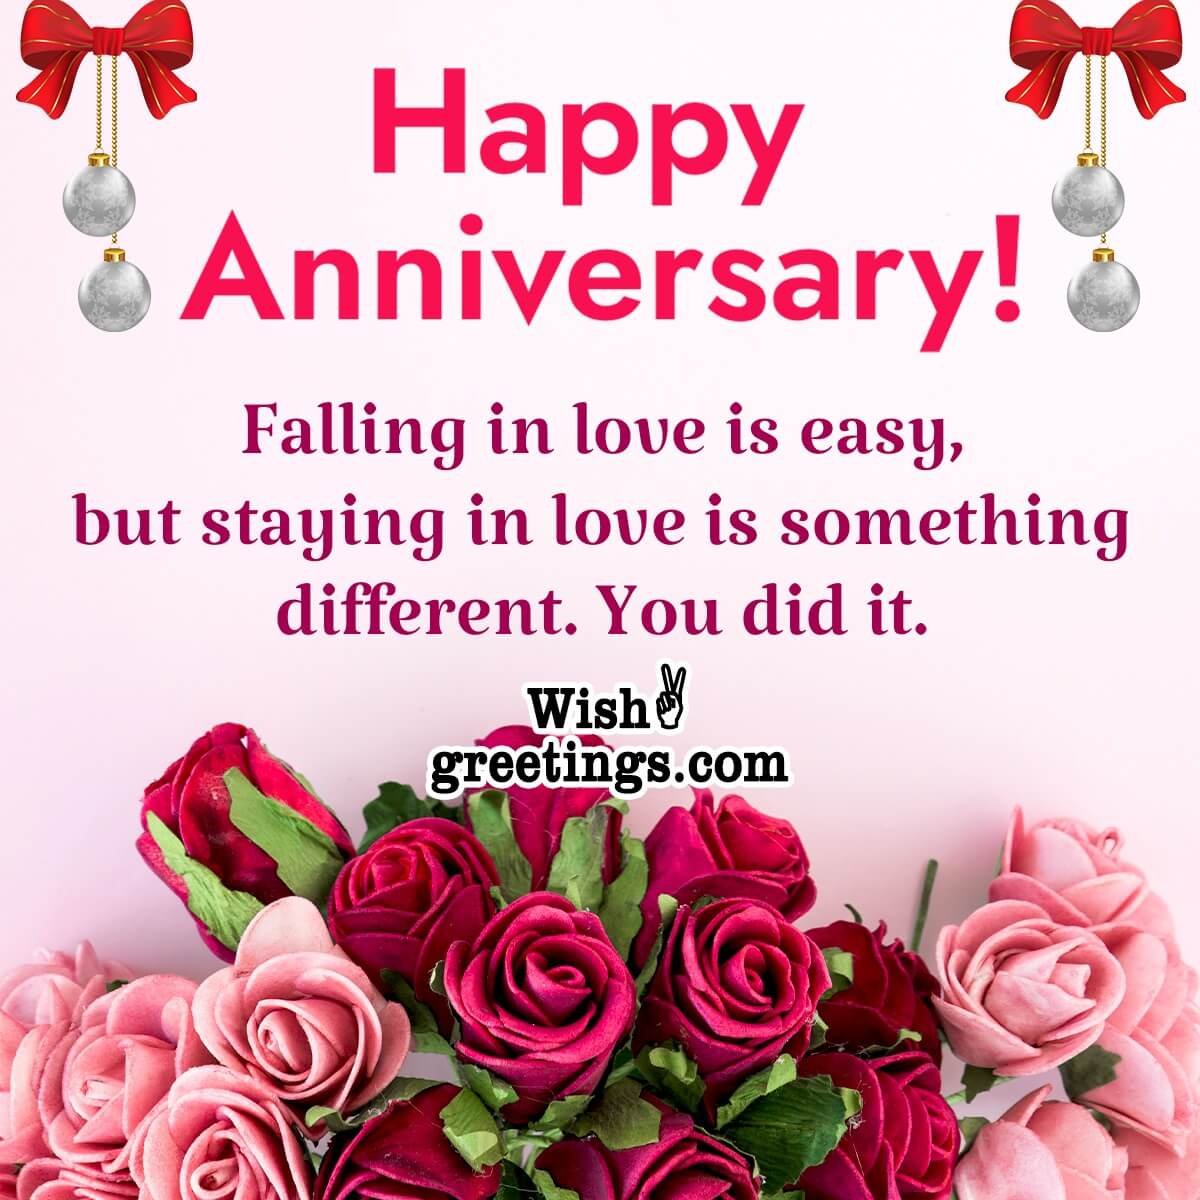 Happy Anniversary Wishes Images - Wish Greetings